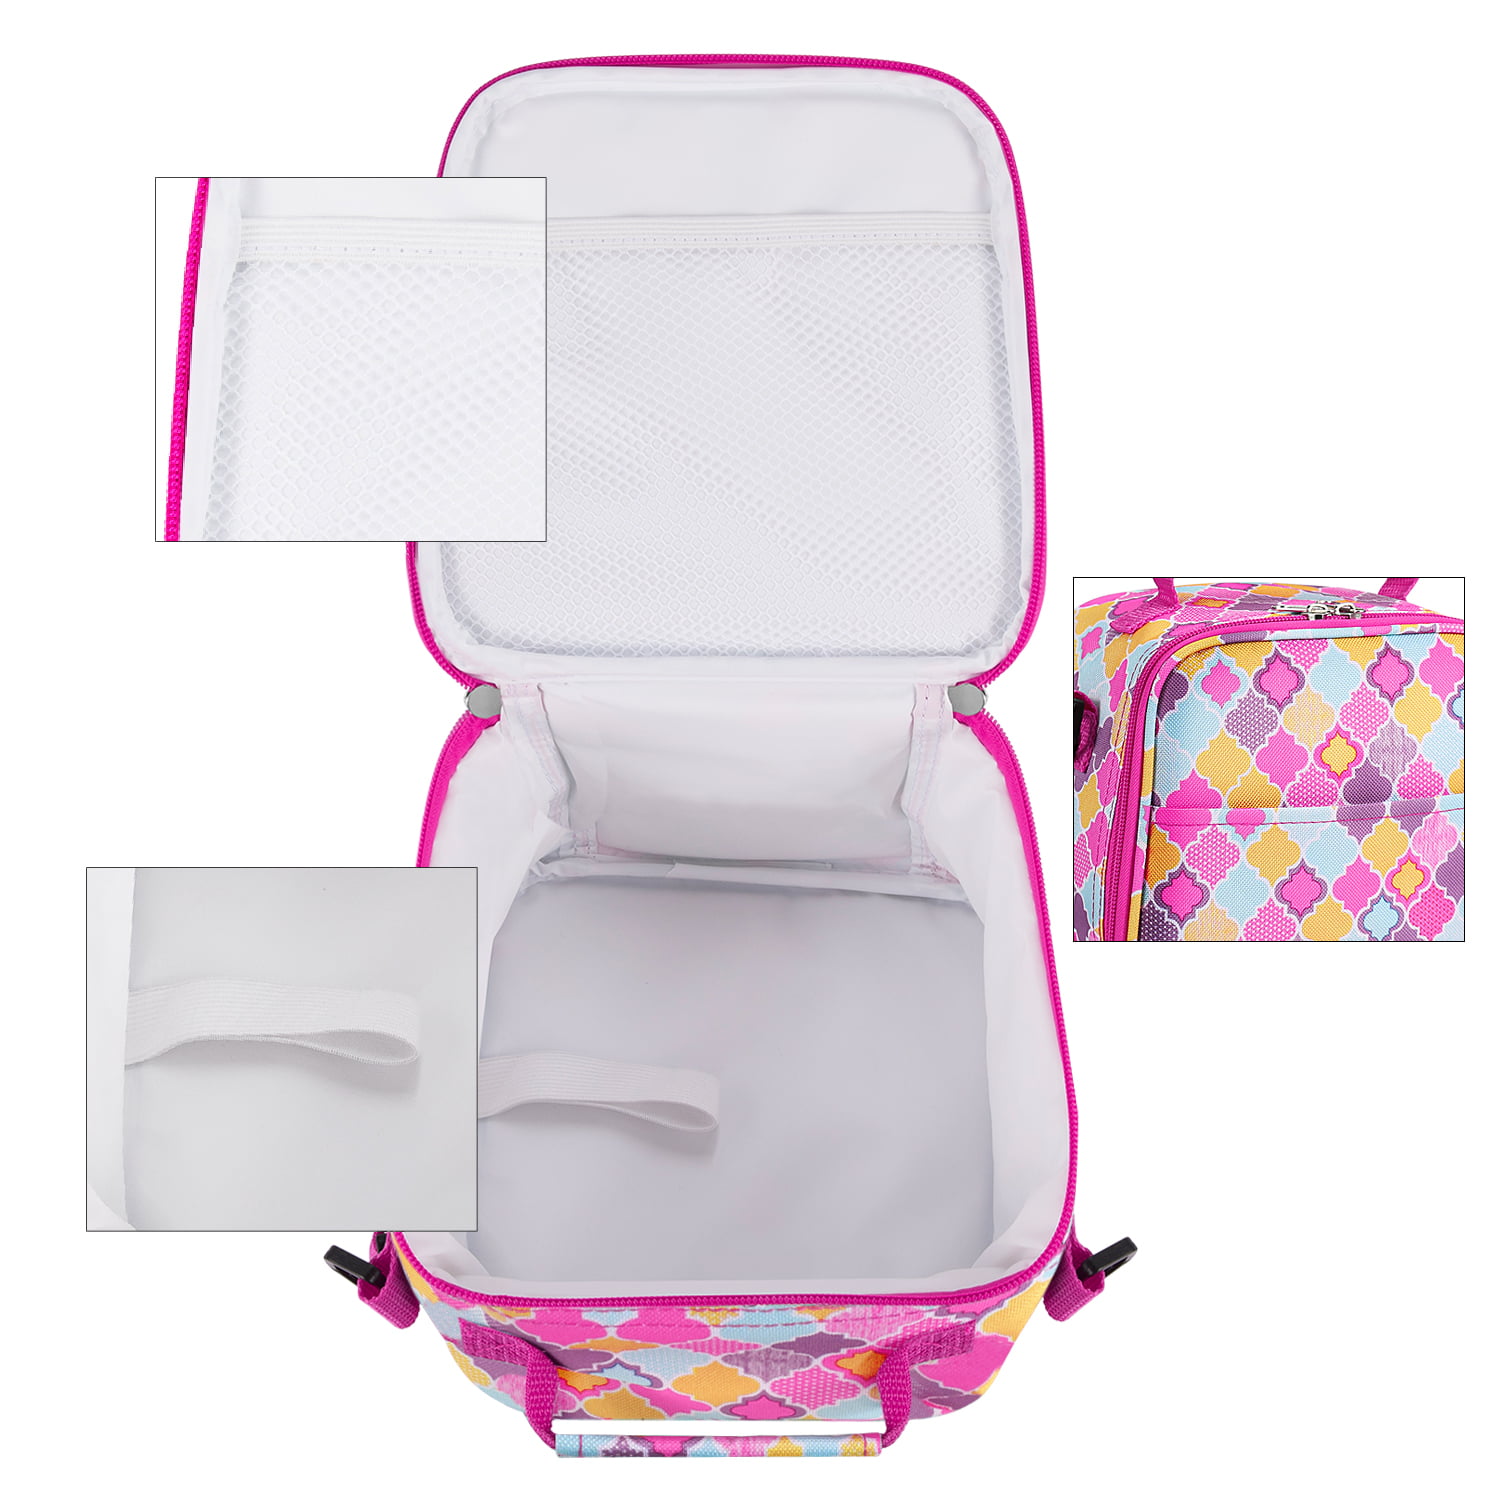 CBGELRT Bento Lunch Box Large Capacity Flat Lunchbox Containers Leakproof  Reusable Lunch Bags Women Kids for Work School Picnic